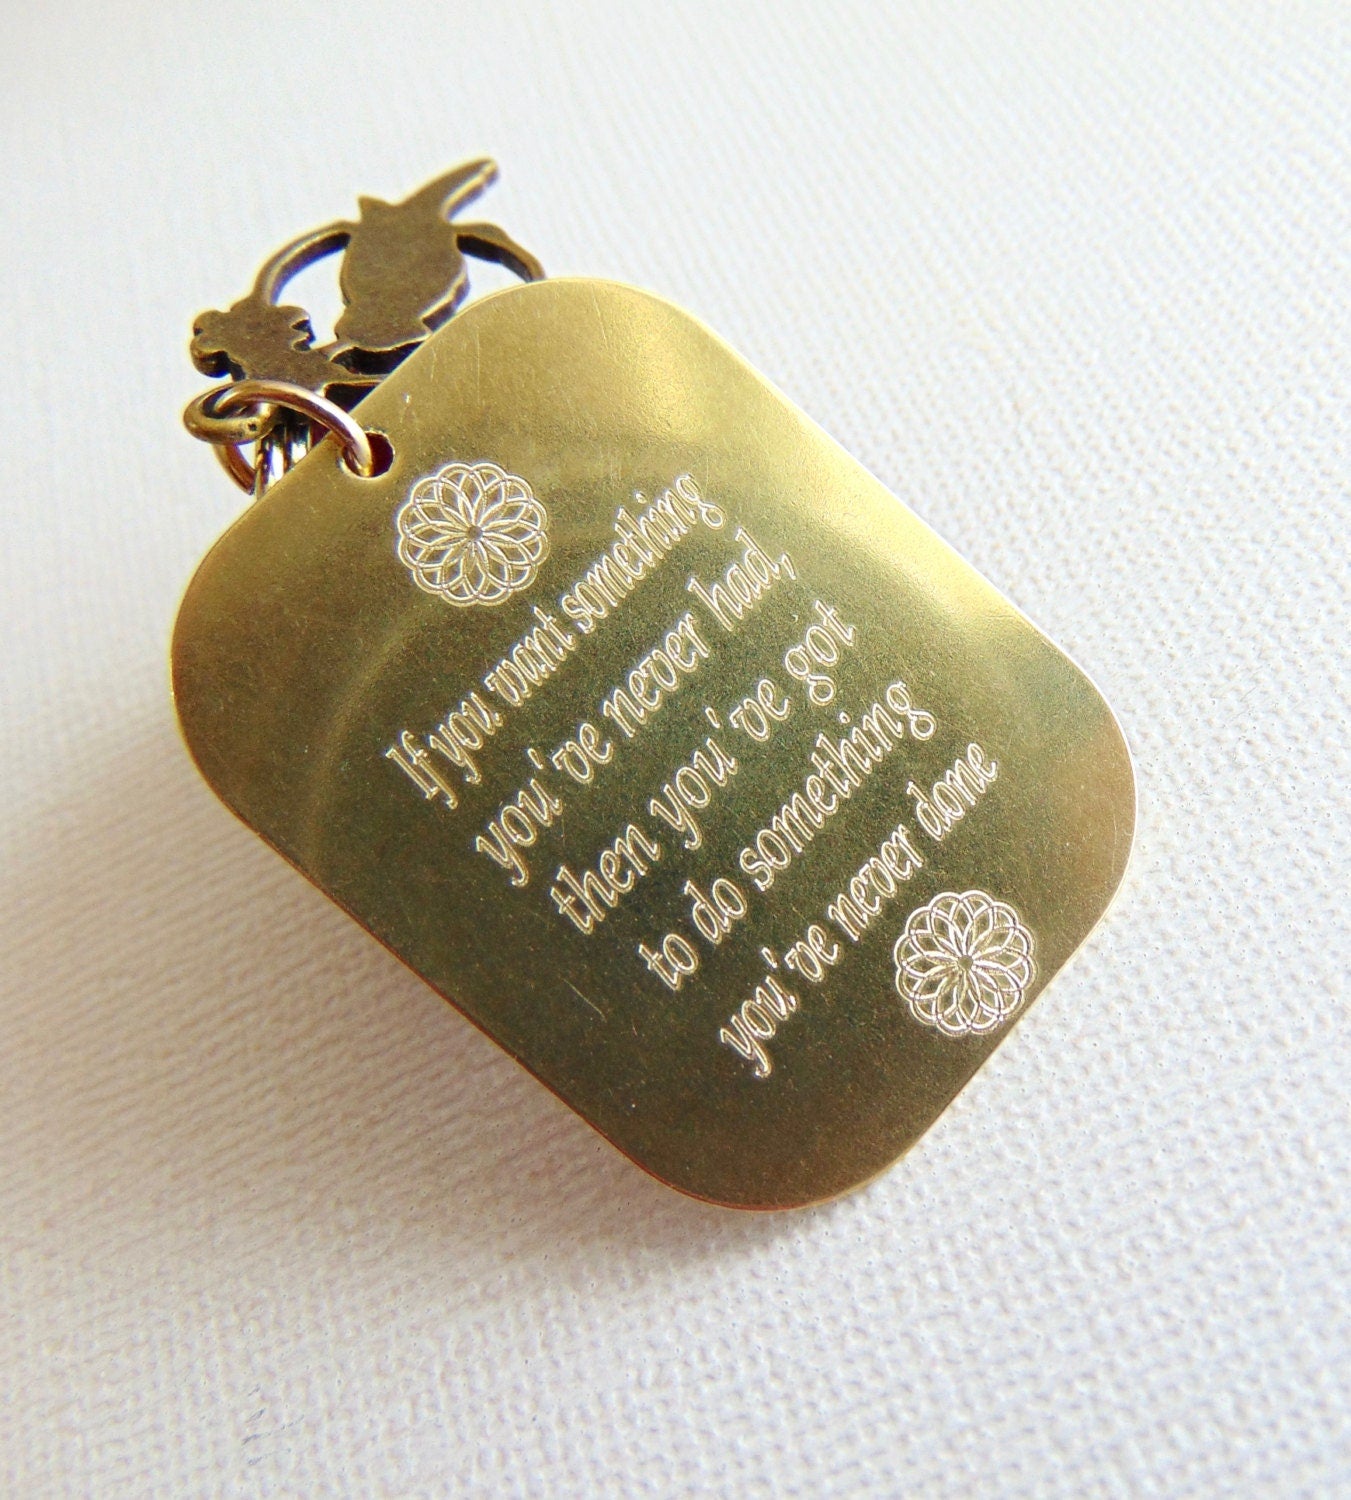 Personalized message engraved on keychain, in gold (Brass)